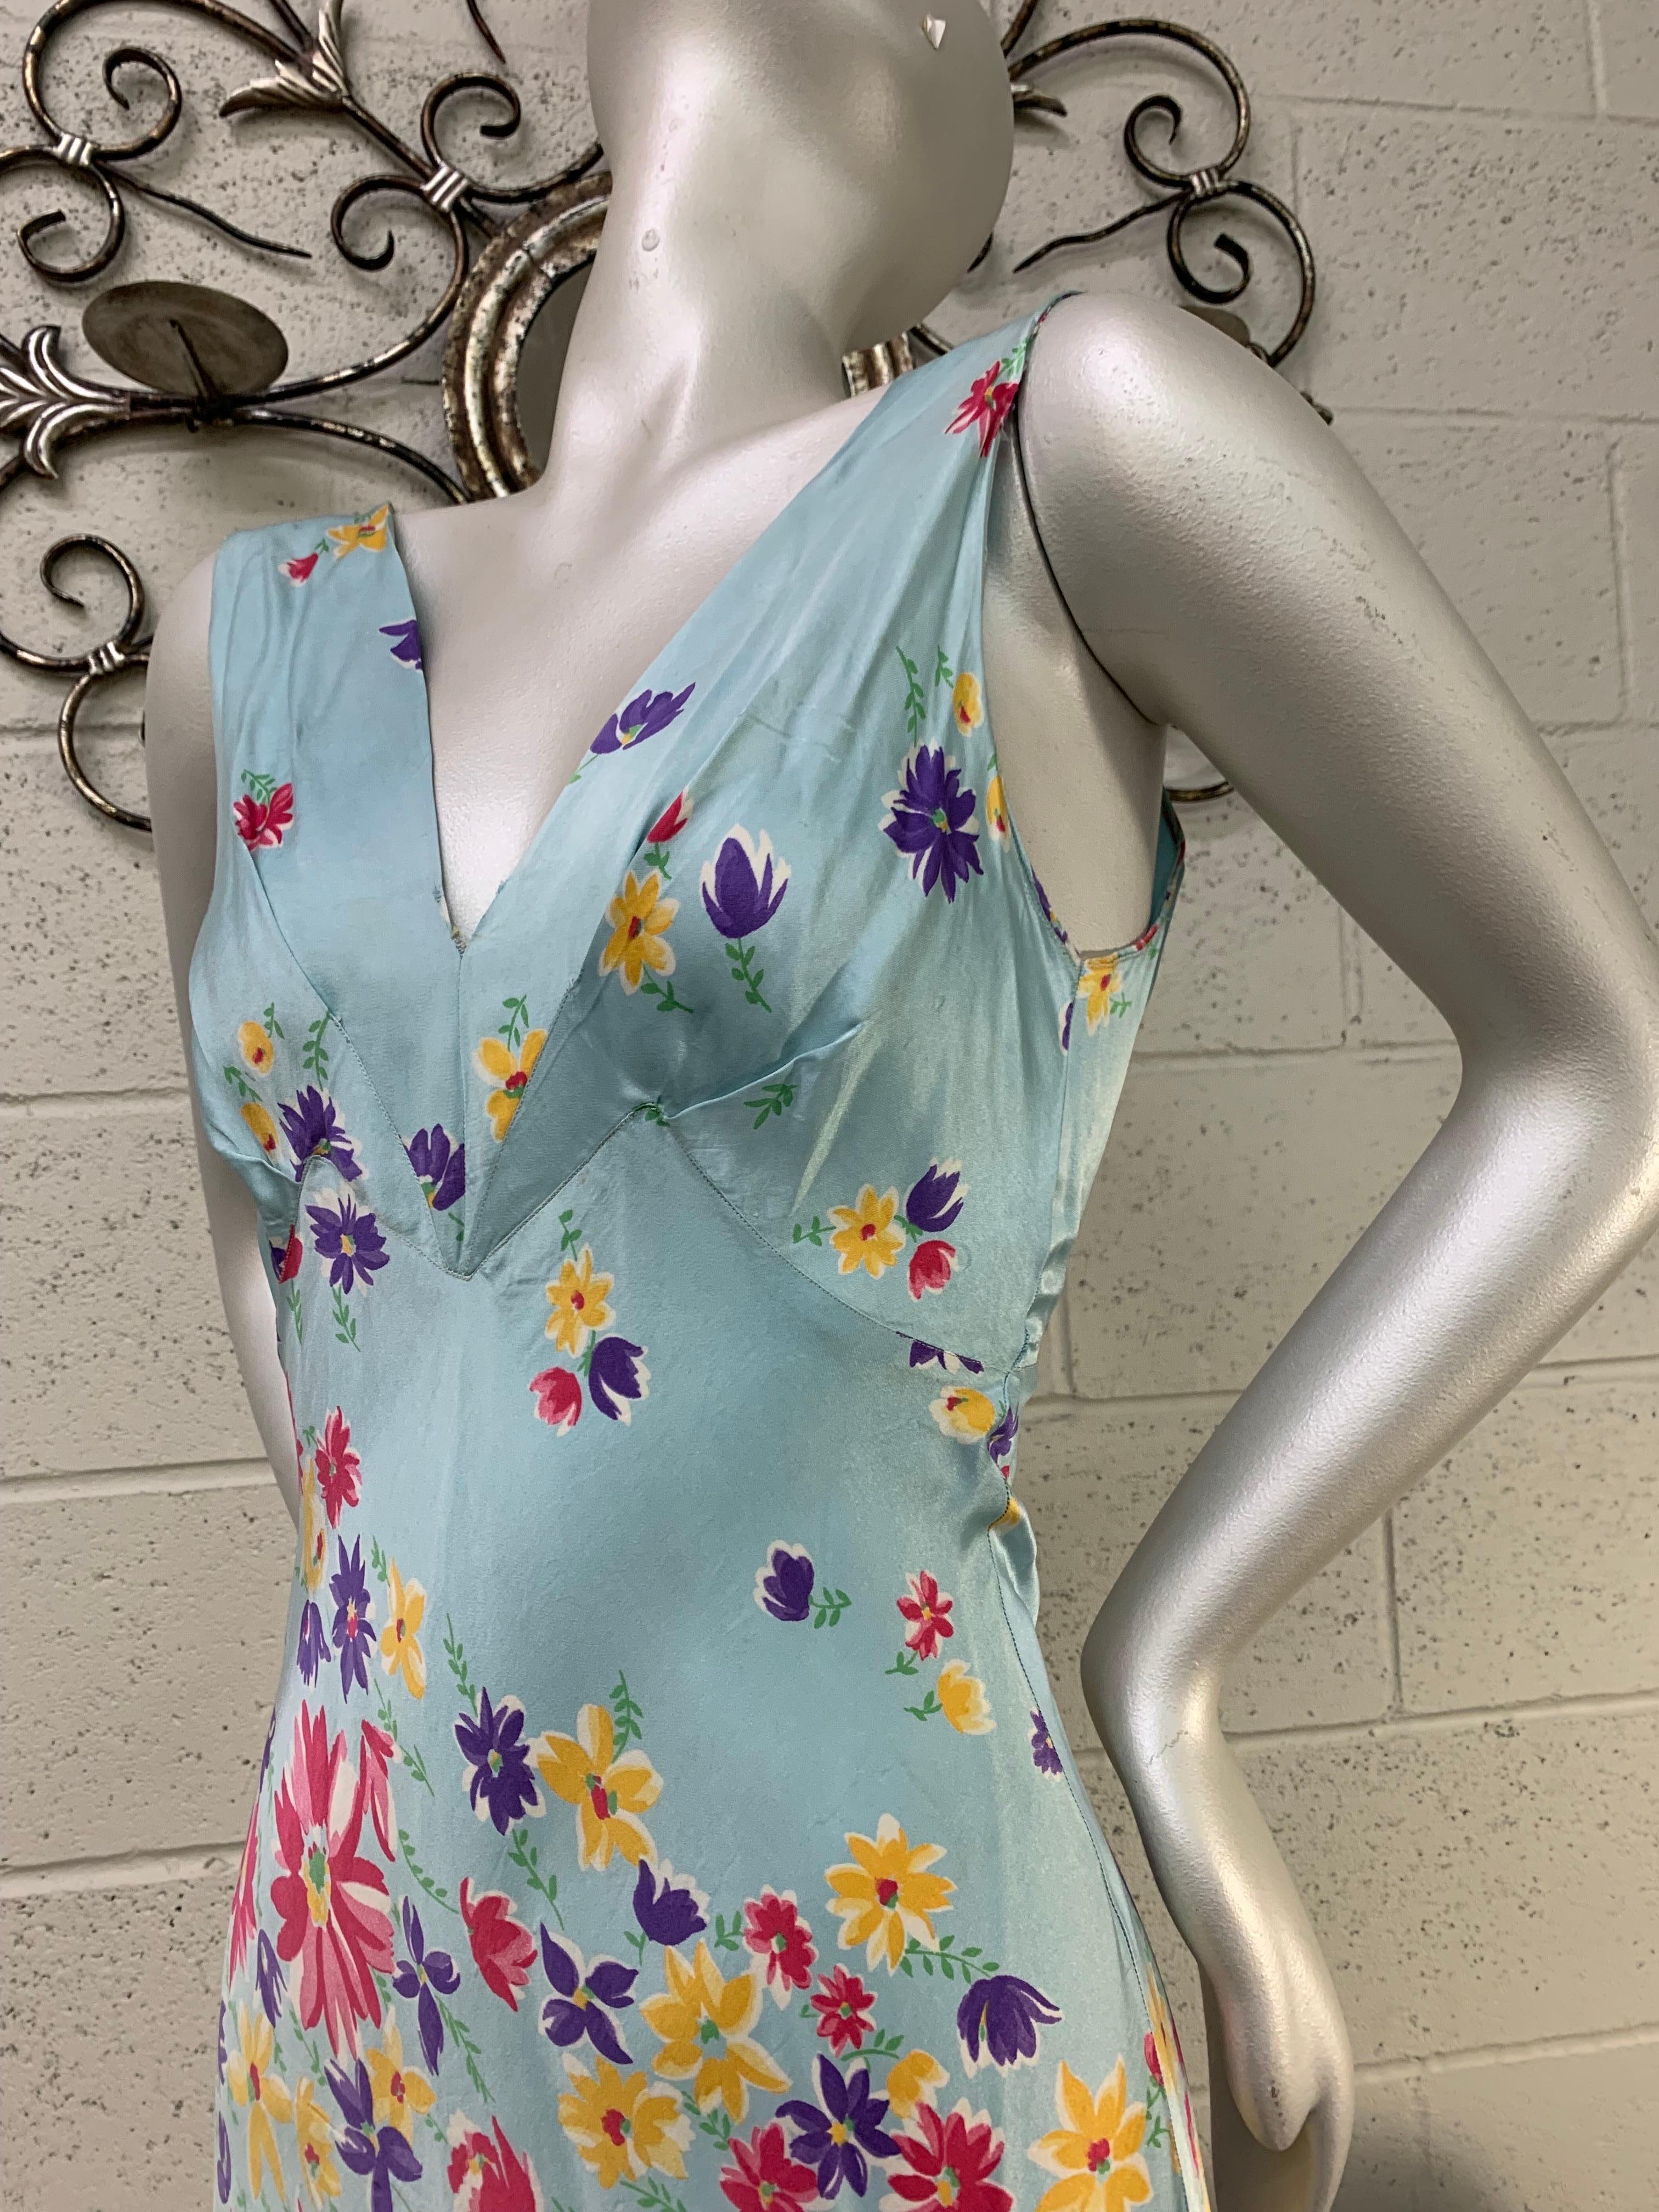 Women's 1930s Bias Floral Print Silk Charmeuse Slip Or Negligee On Pale Blue Ground